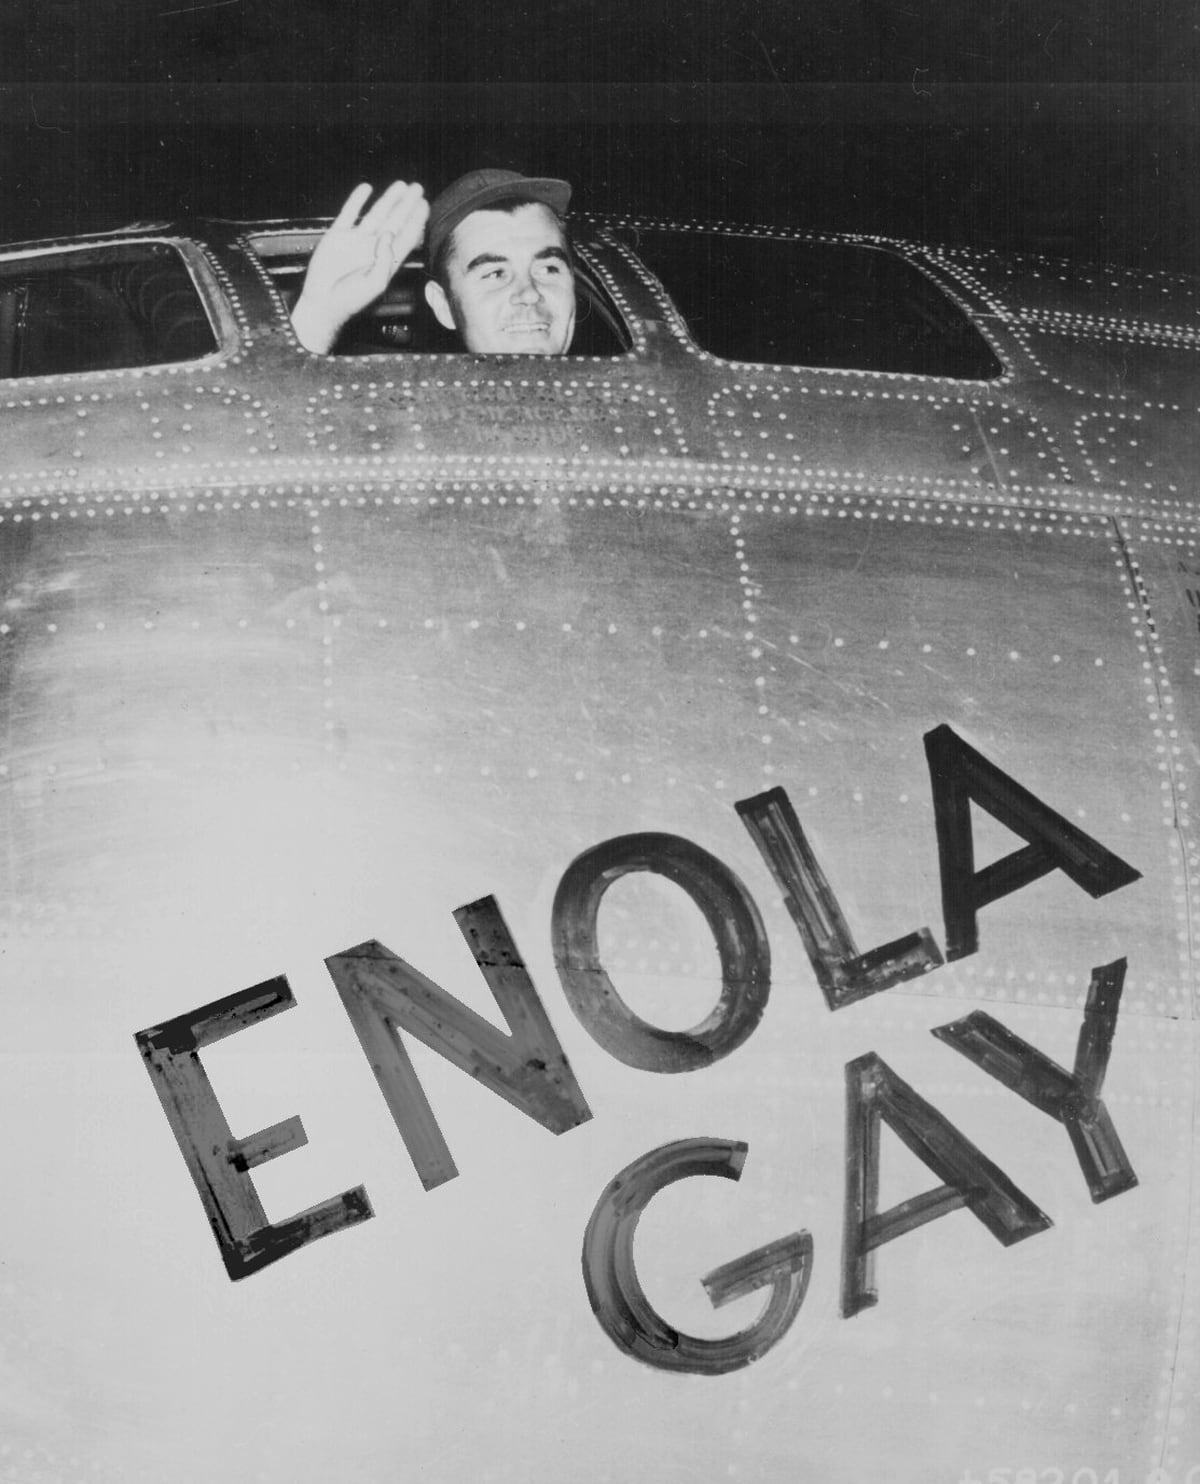 the pilot of enola gay flying out of the shockwave